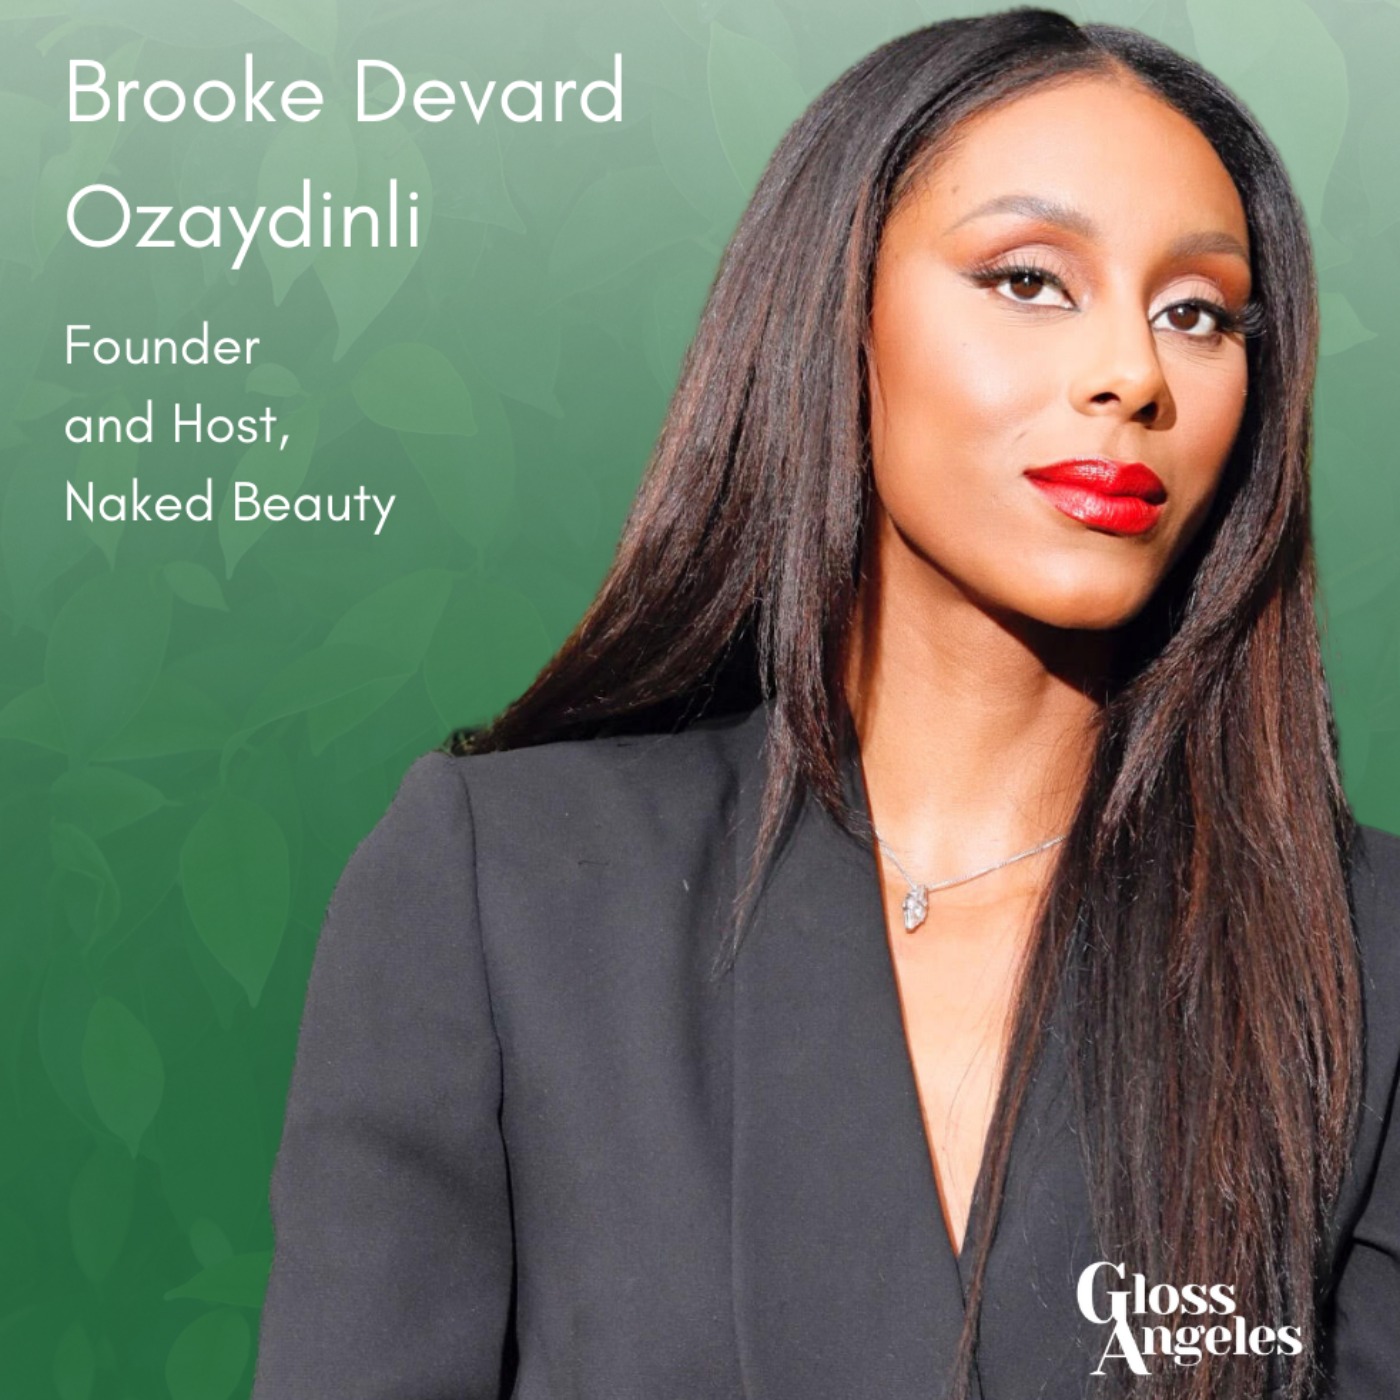 Are Fragrance Dupes Ruining the Industry? (With Naked Beauty's Brooke Devard Ozaydinli)